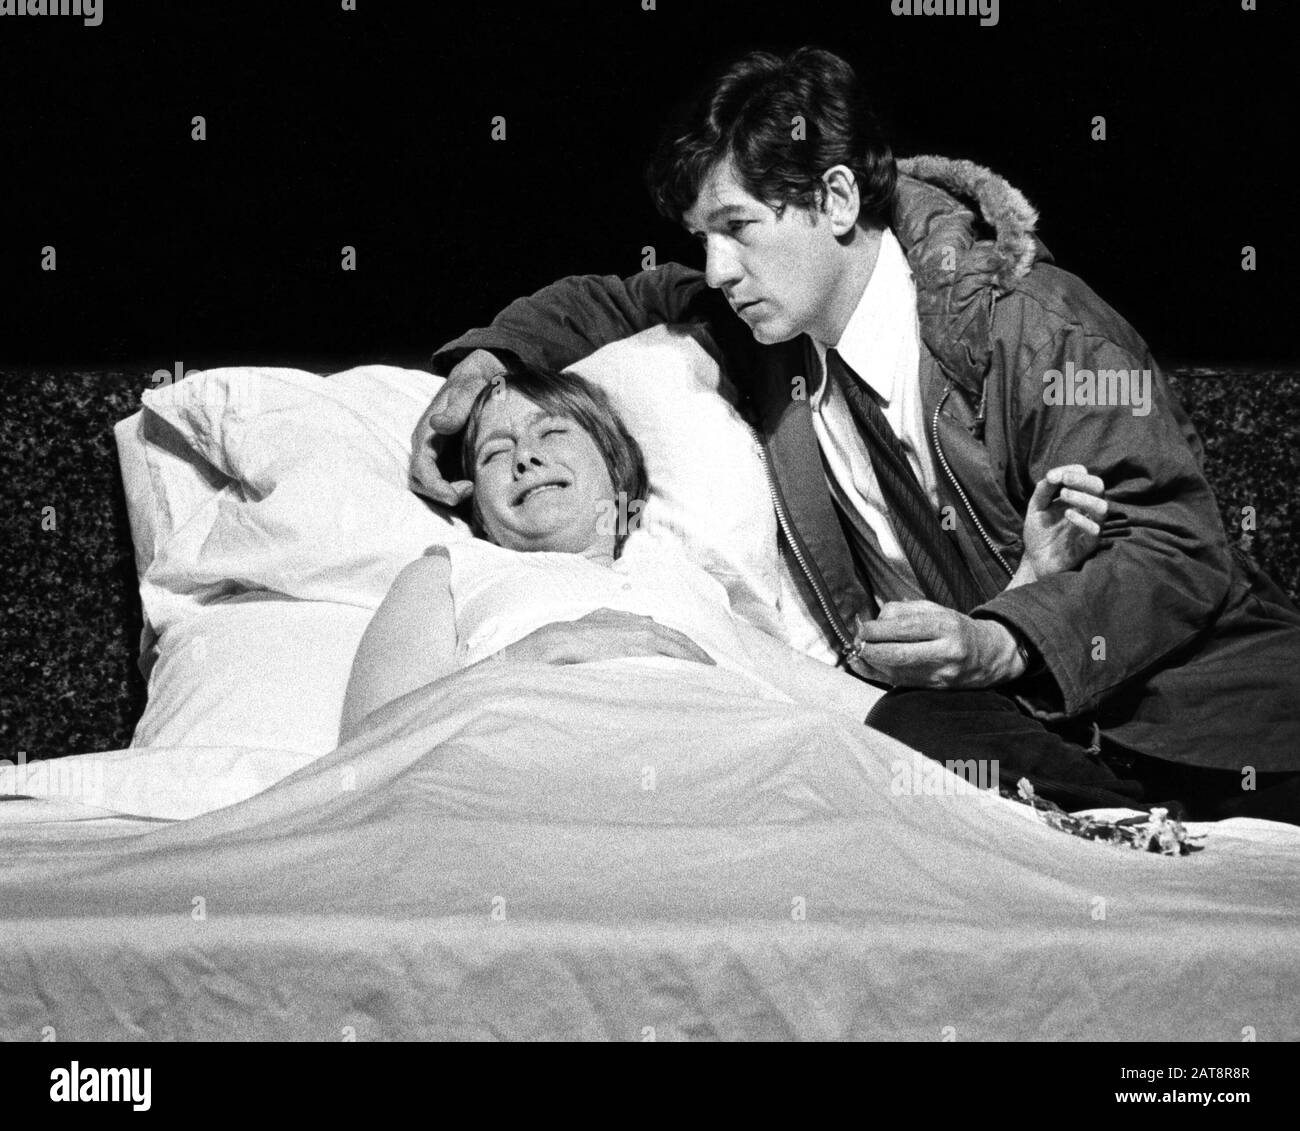 Gemma Jones (Anne), Ian McKellen (Colin) in ASHES by David Rudkin directed by Ron Daniels at the Young Vic, London in 1975.           Sir Ian Murray McKellen, born 1939, Burnley, England. English stage and film actor. Co-founder of Stonewall, gay rights activist, knighted in 1990, made a Companion of Honour 2007. Stock Photo